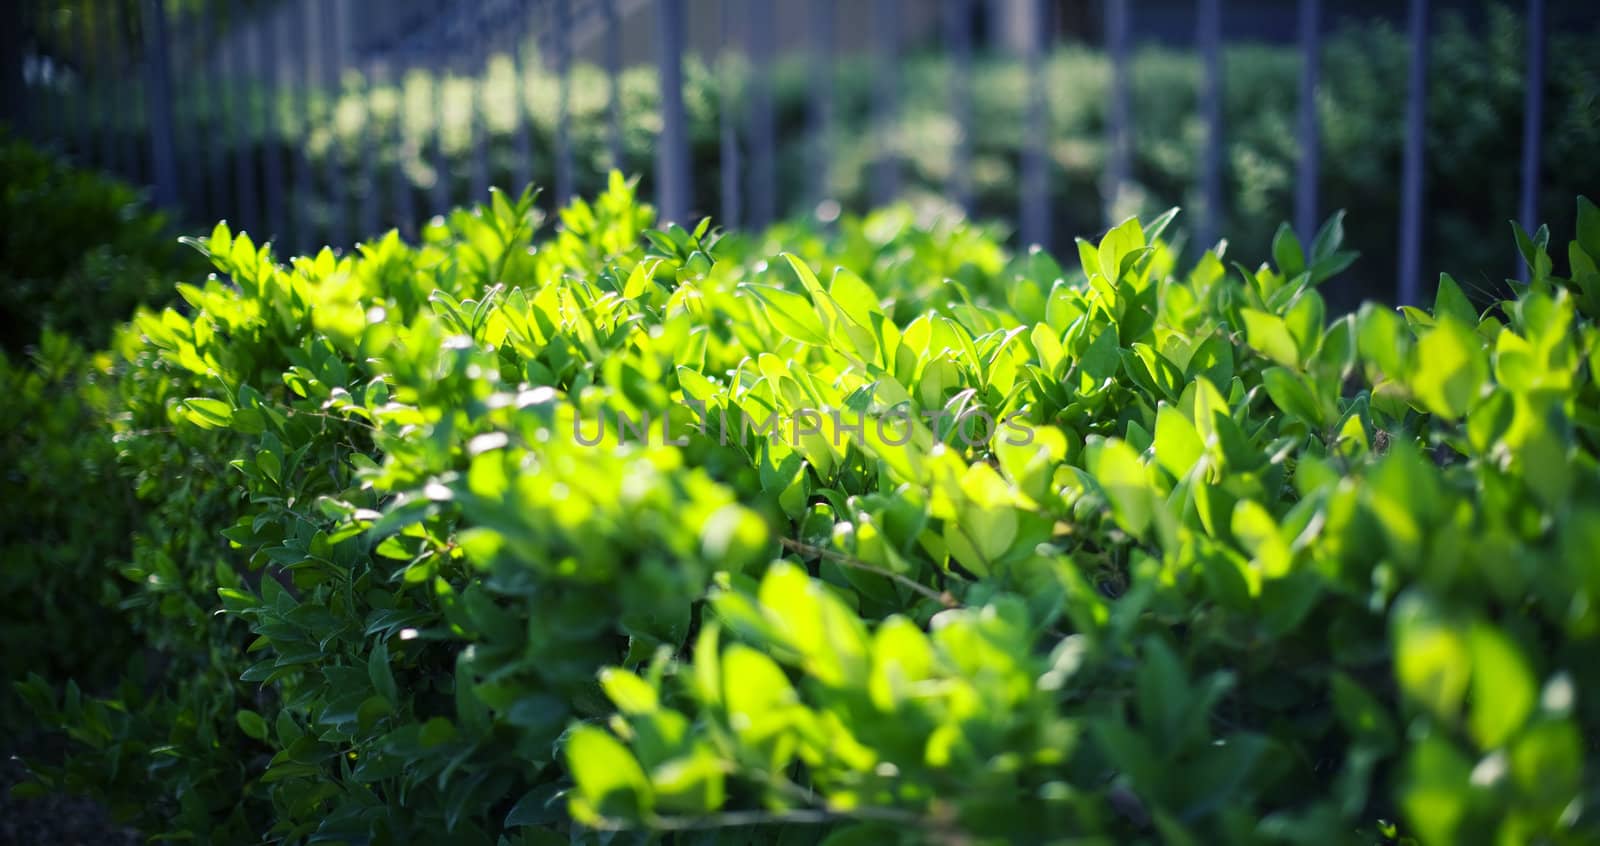 green leaves with the sunlight coming through the top leaves of the bush against the wall